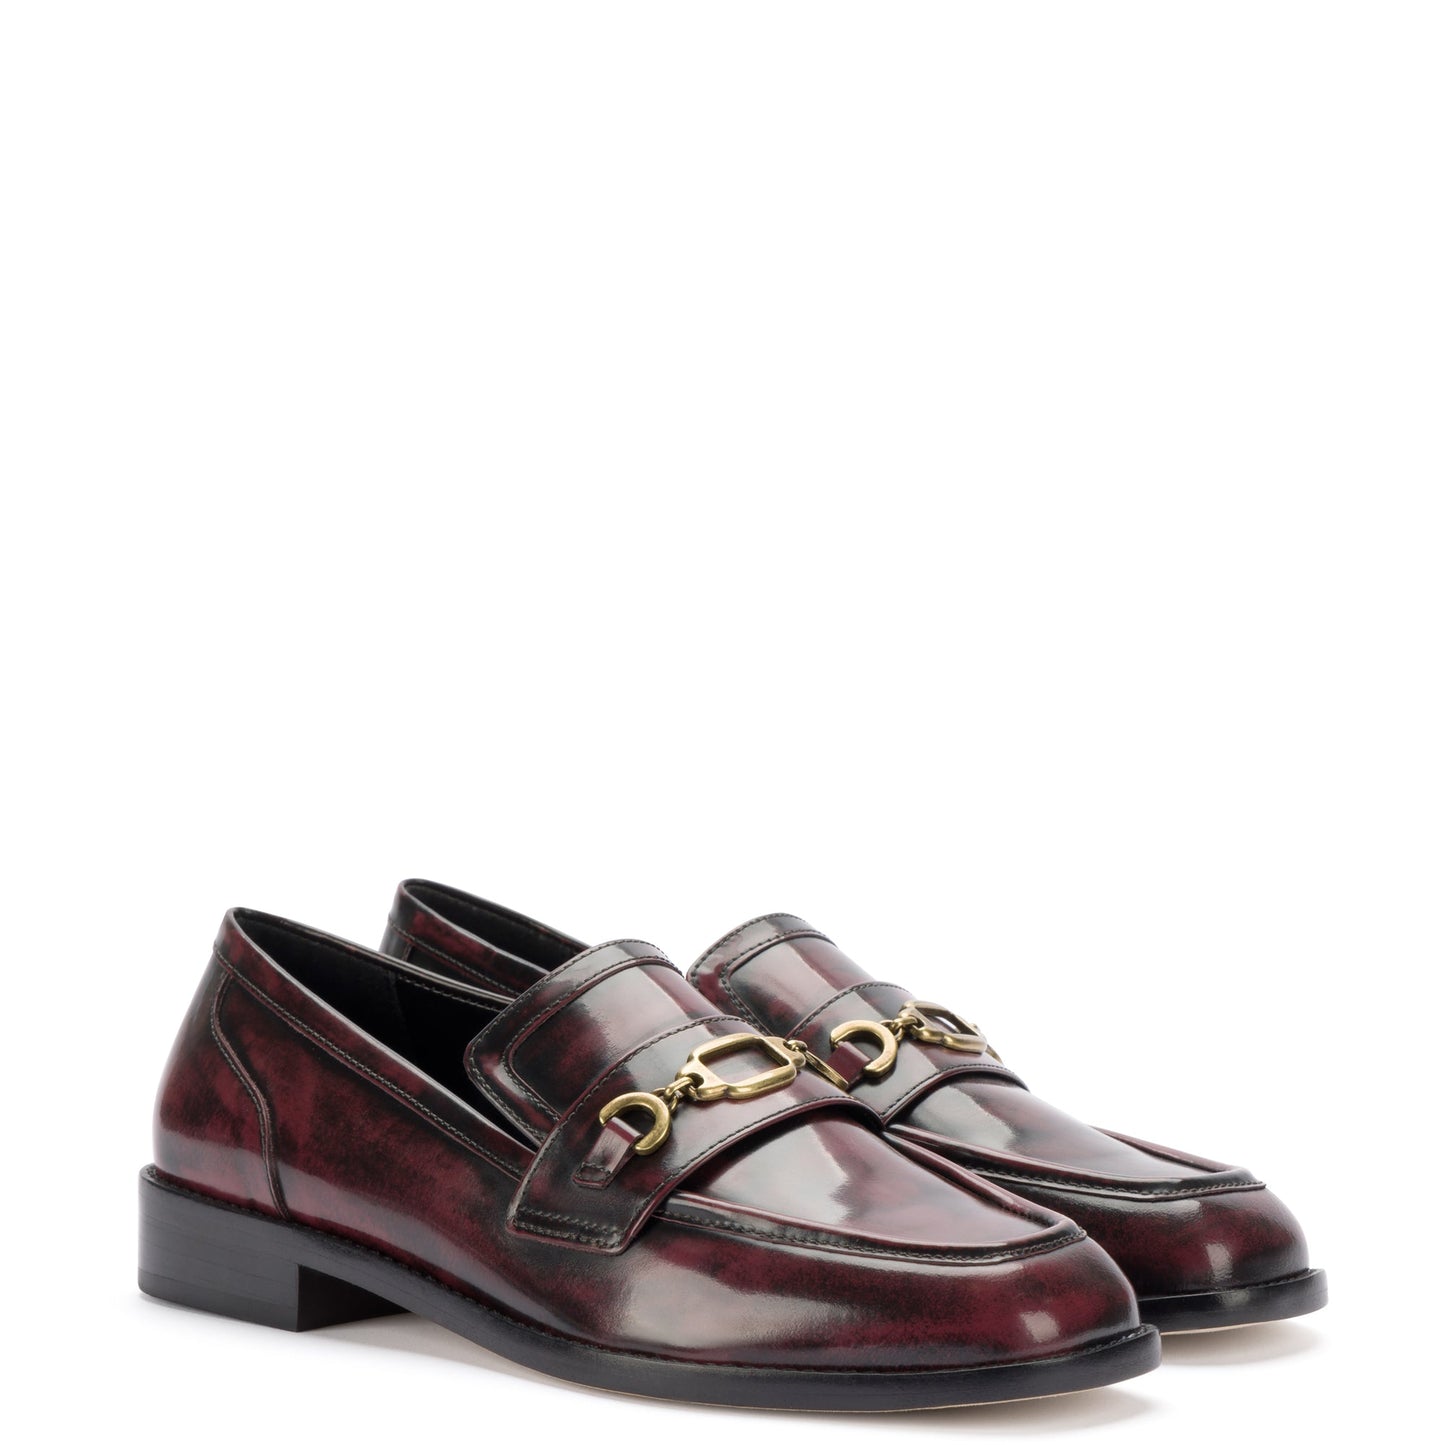 LARROUDE Patricia Loafer | Brushoff Wine Leather